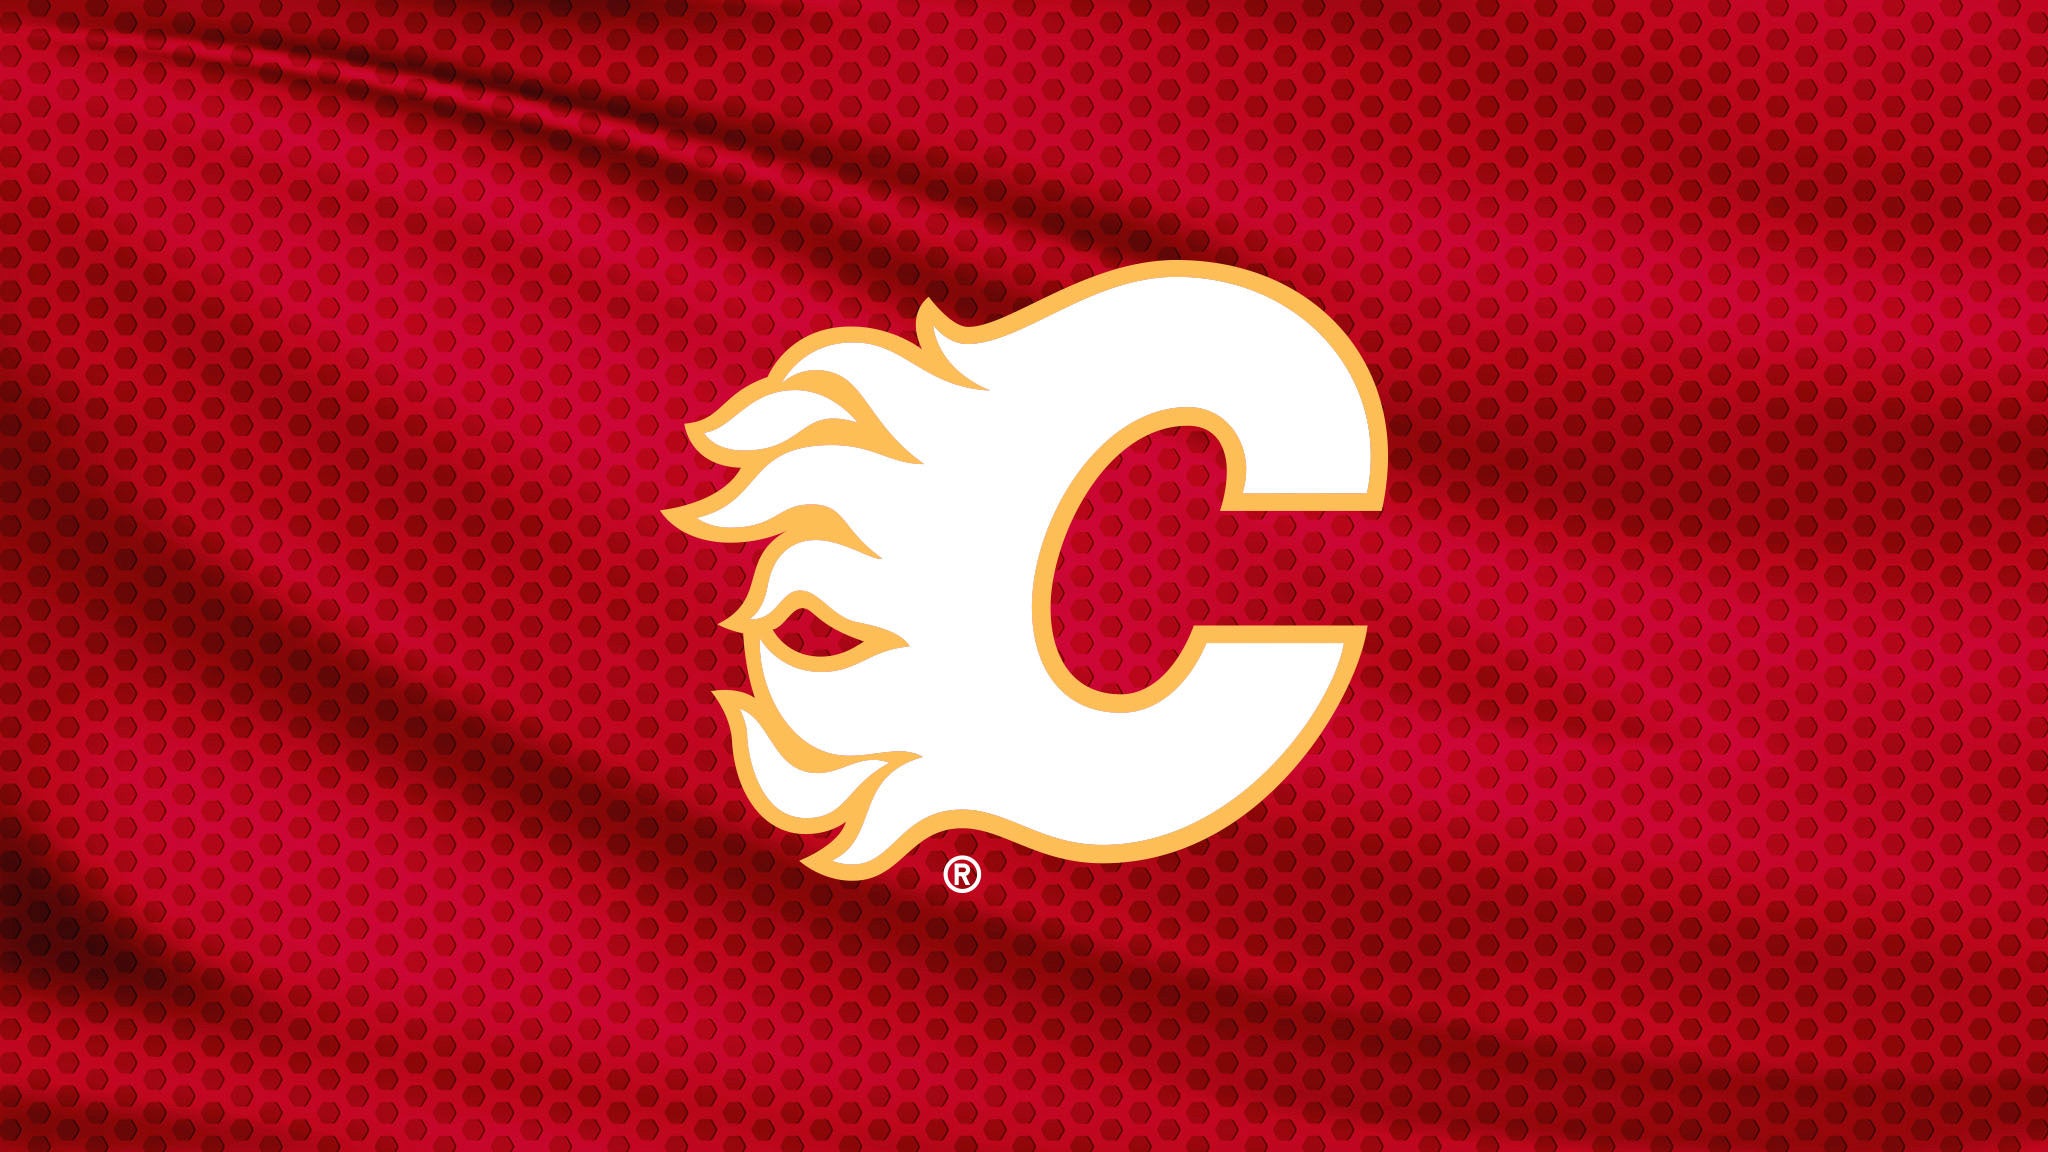 Calgary Flames vs. Arizona Coyotes in Calgary promo photo for Scratchy Tuesday presale offer code